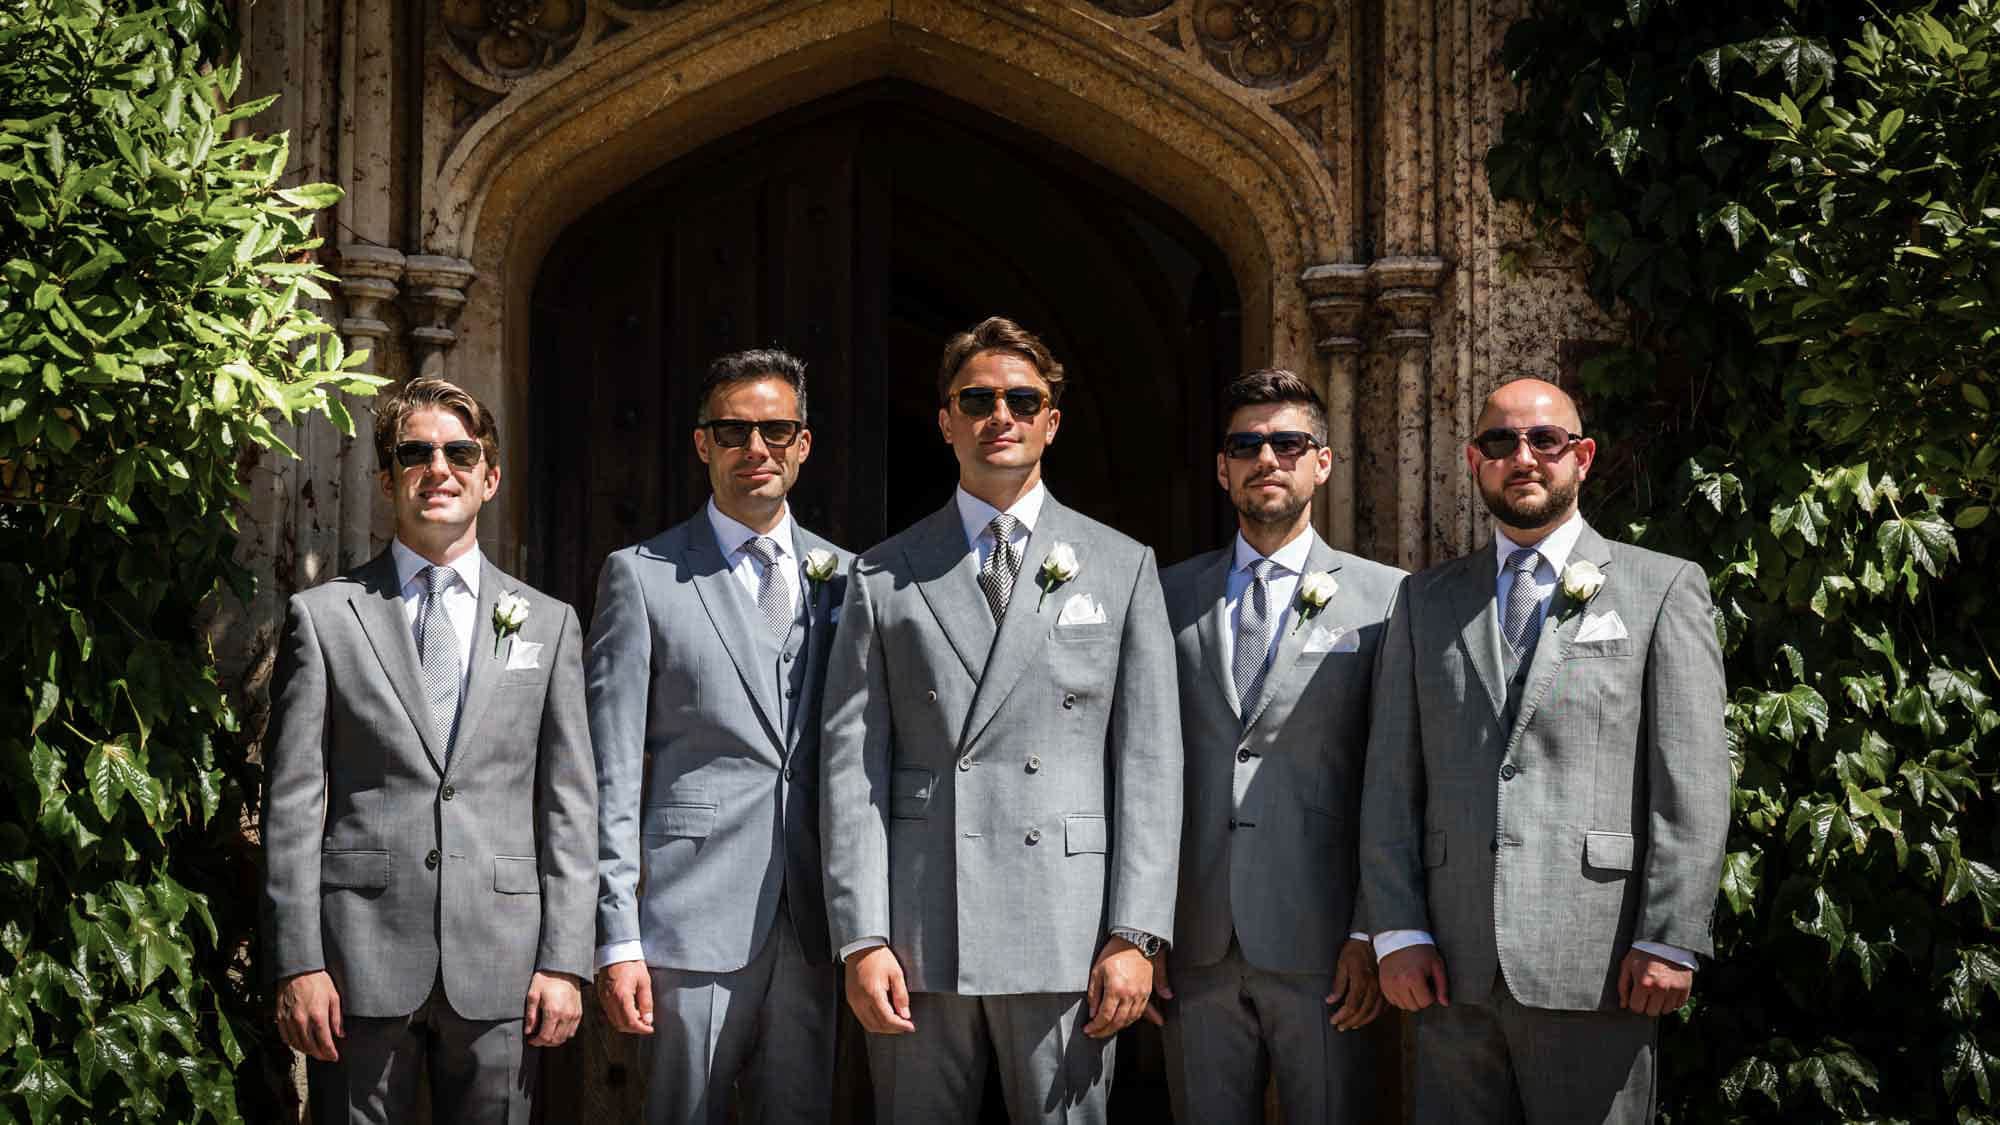 Oli and the groomsmen at St Audries Park